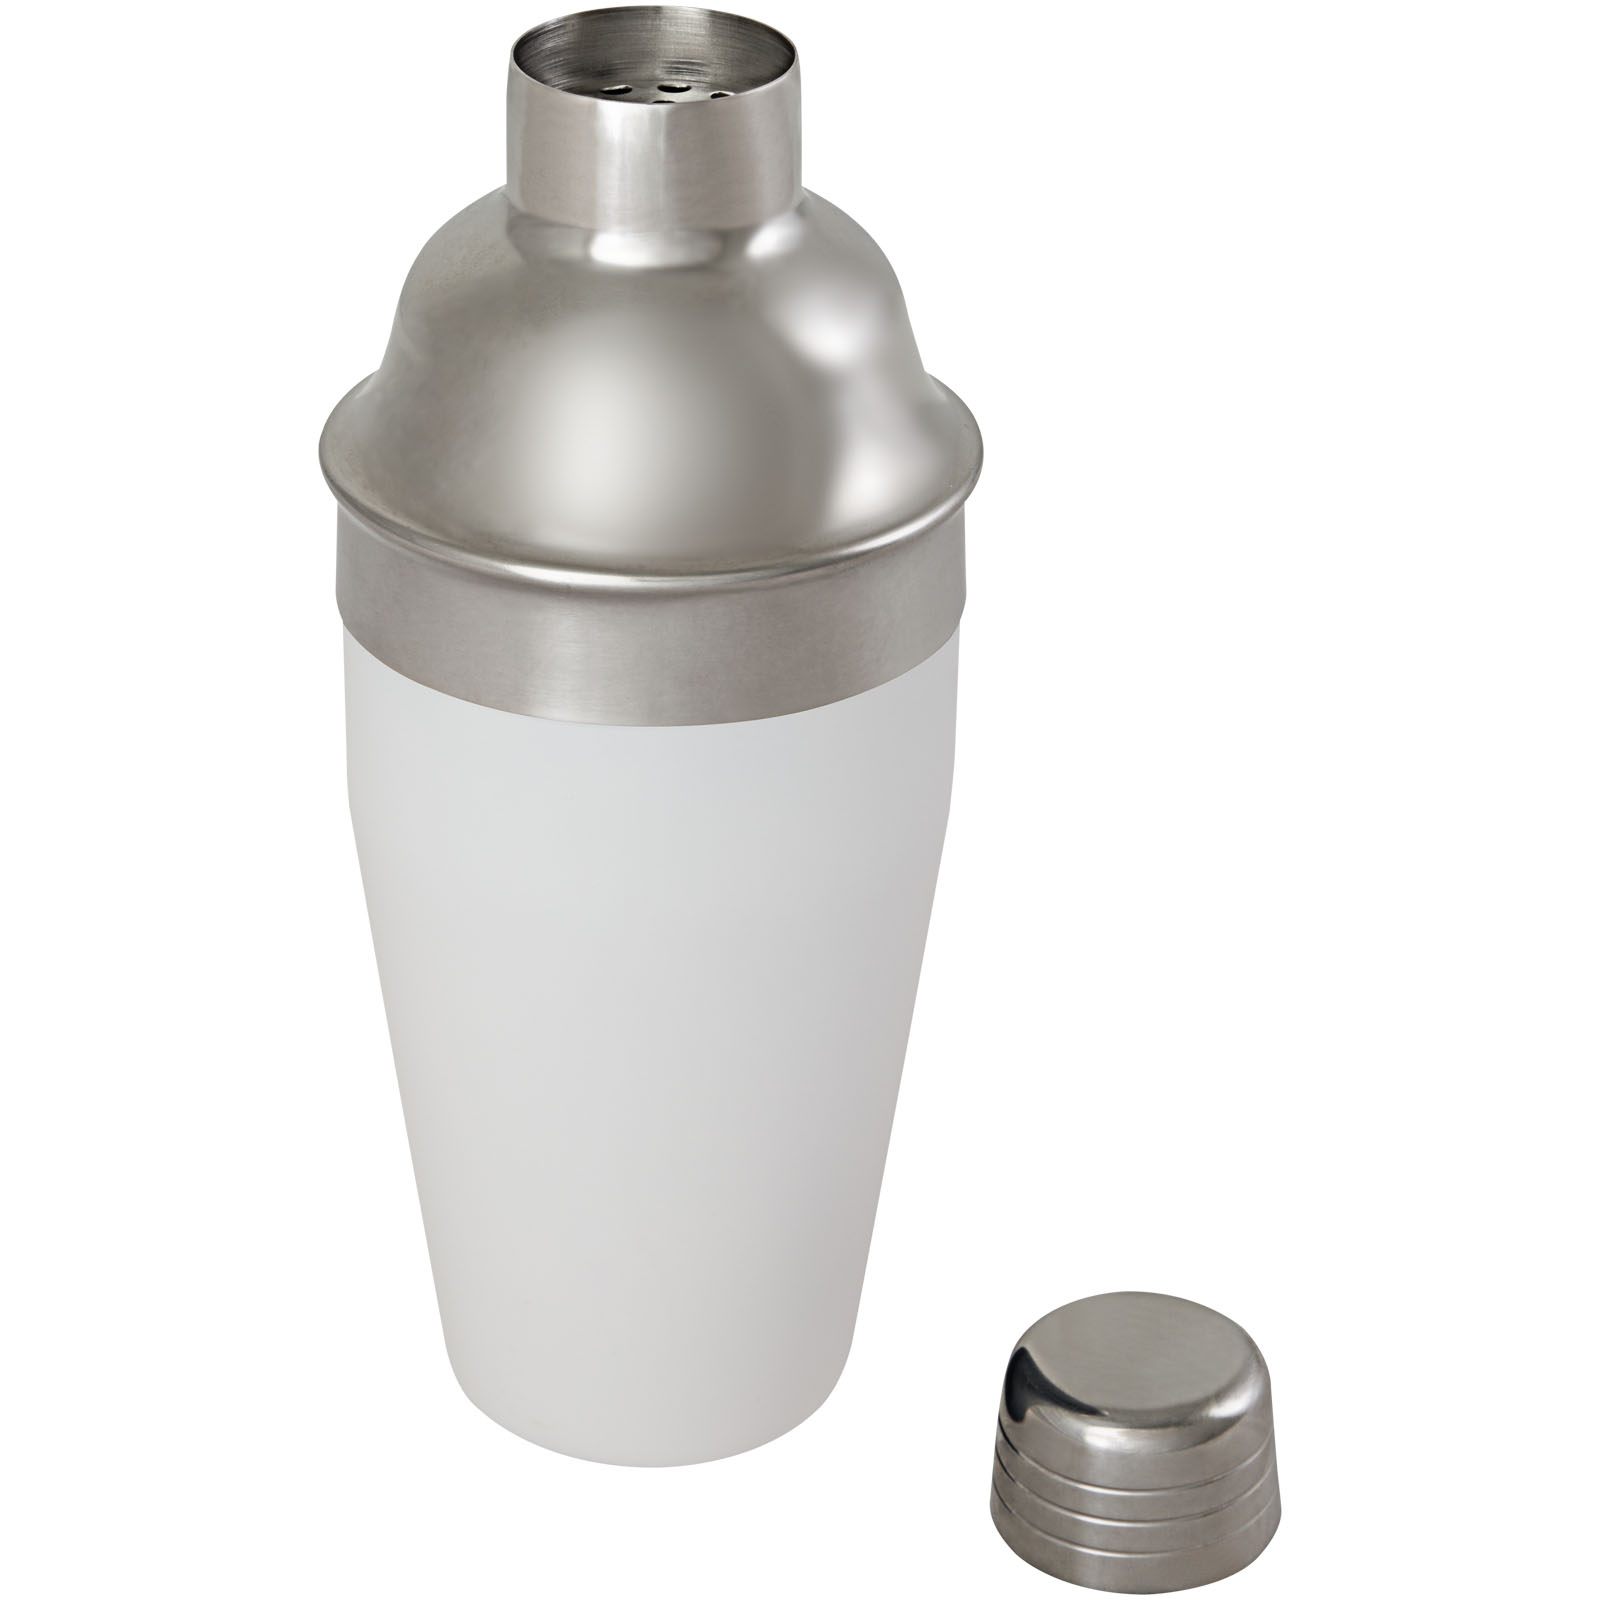 Home & Kitchen - Gaudie recycled stainless steel cocktail shaker